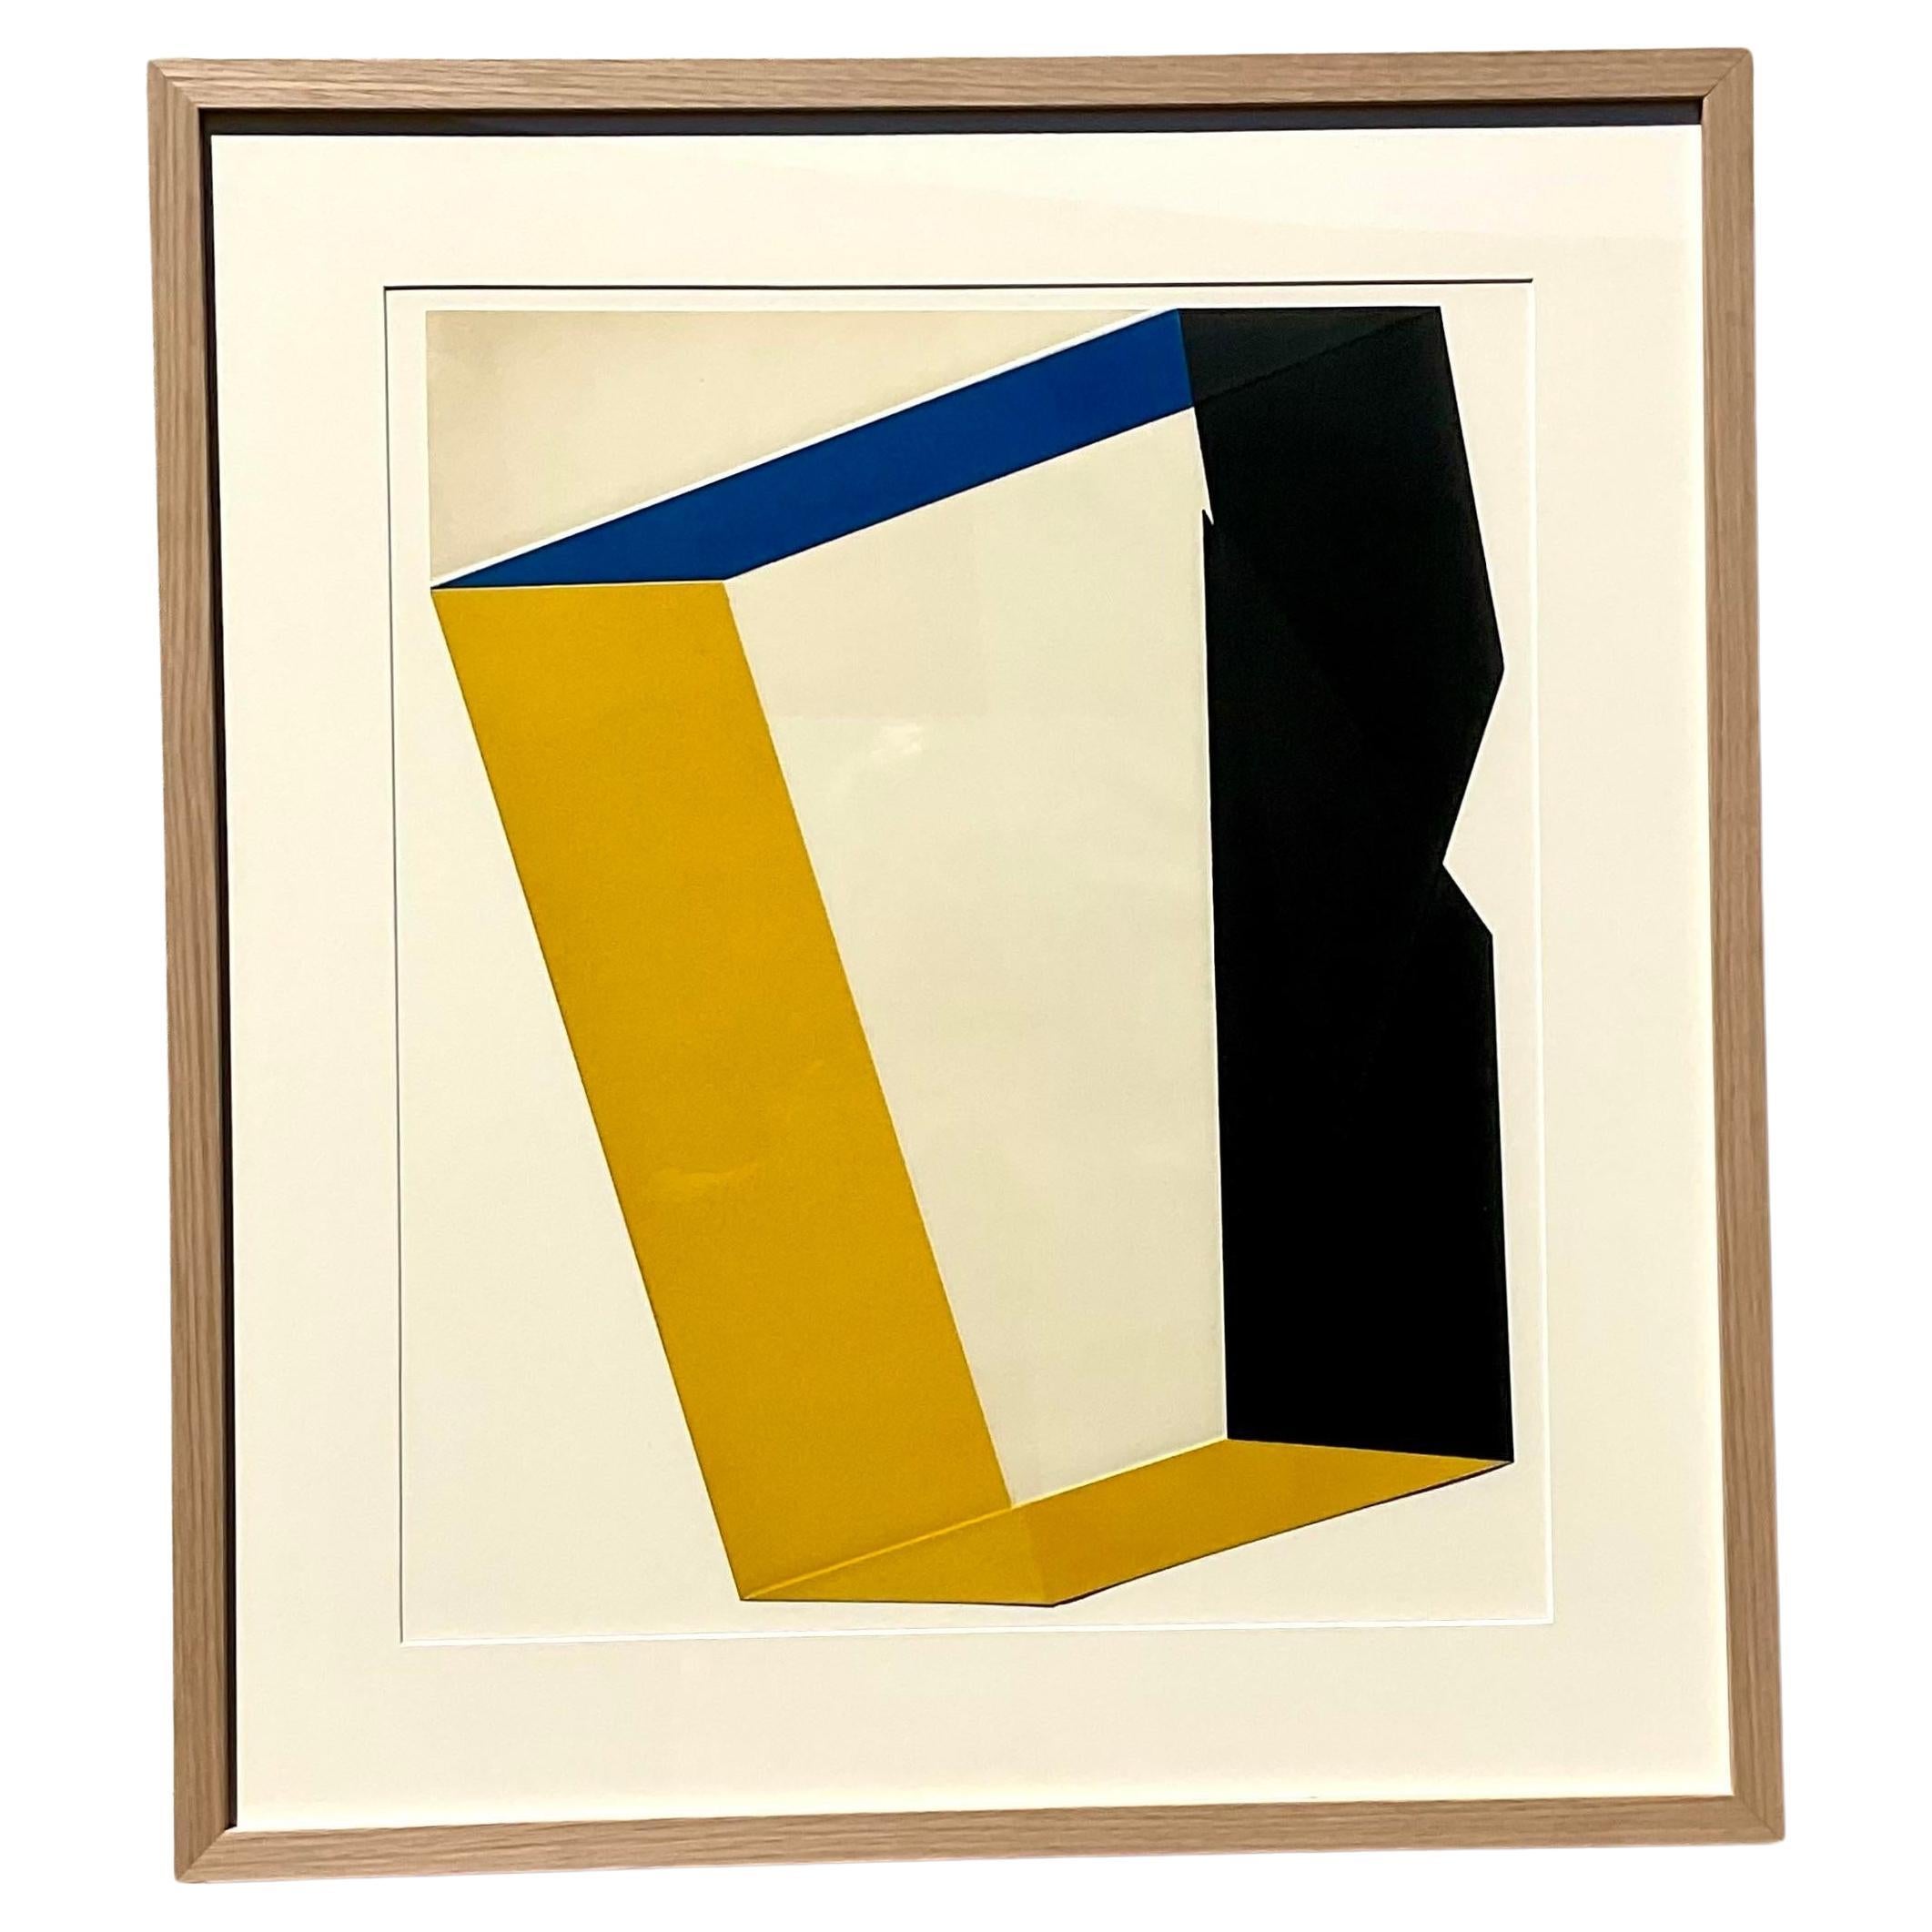 Vintage 1970s Geometric Abstract Colored Lithograph